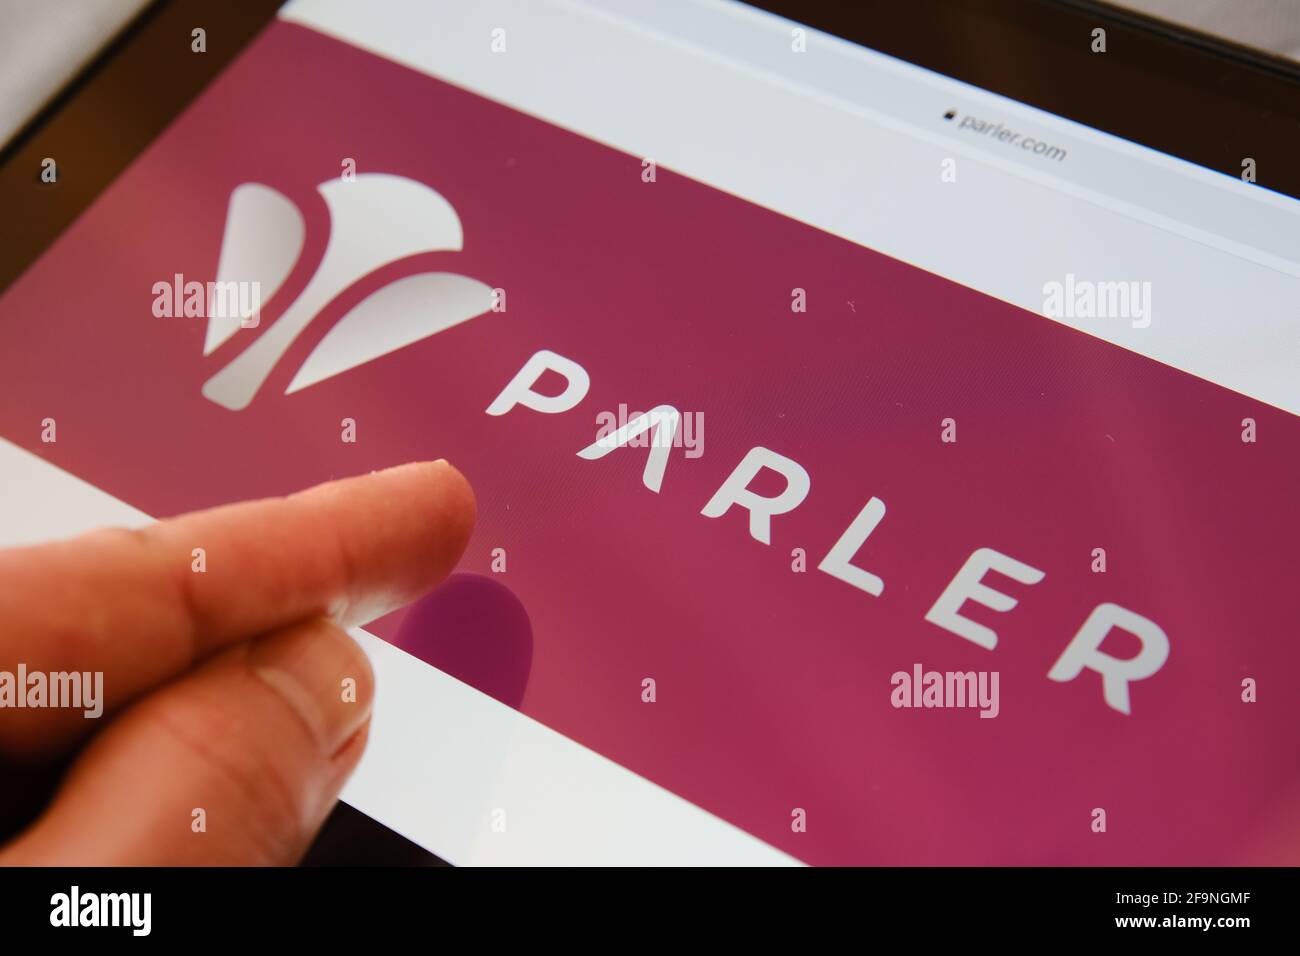 New Parler logo seen on website seen on the screen of Apple ipad and blurred finger pointing at it. Concept. Parler app is conservative social media p Stock Photo